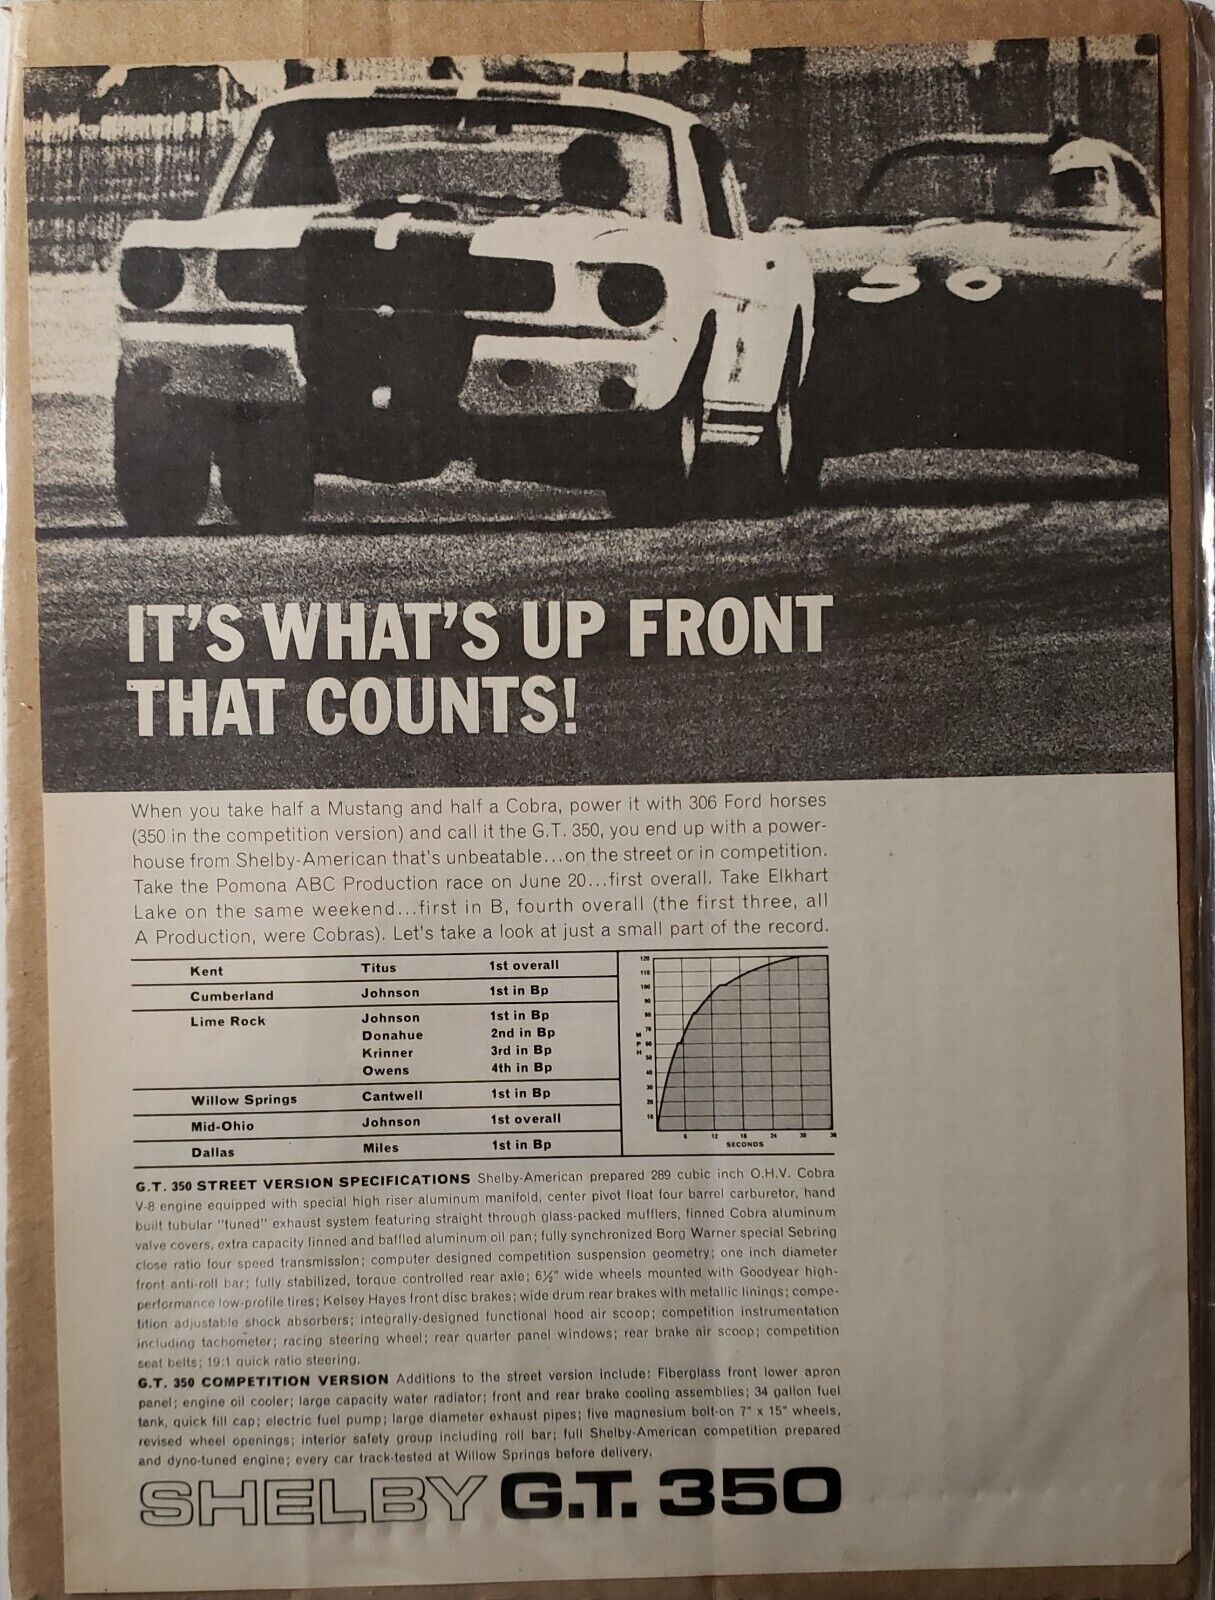 A VINTAGE WRITE UP FOR THE FIRST 1965 SHELBY GT-350 RACE CAR